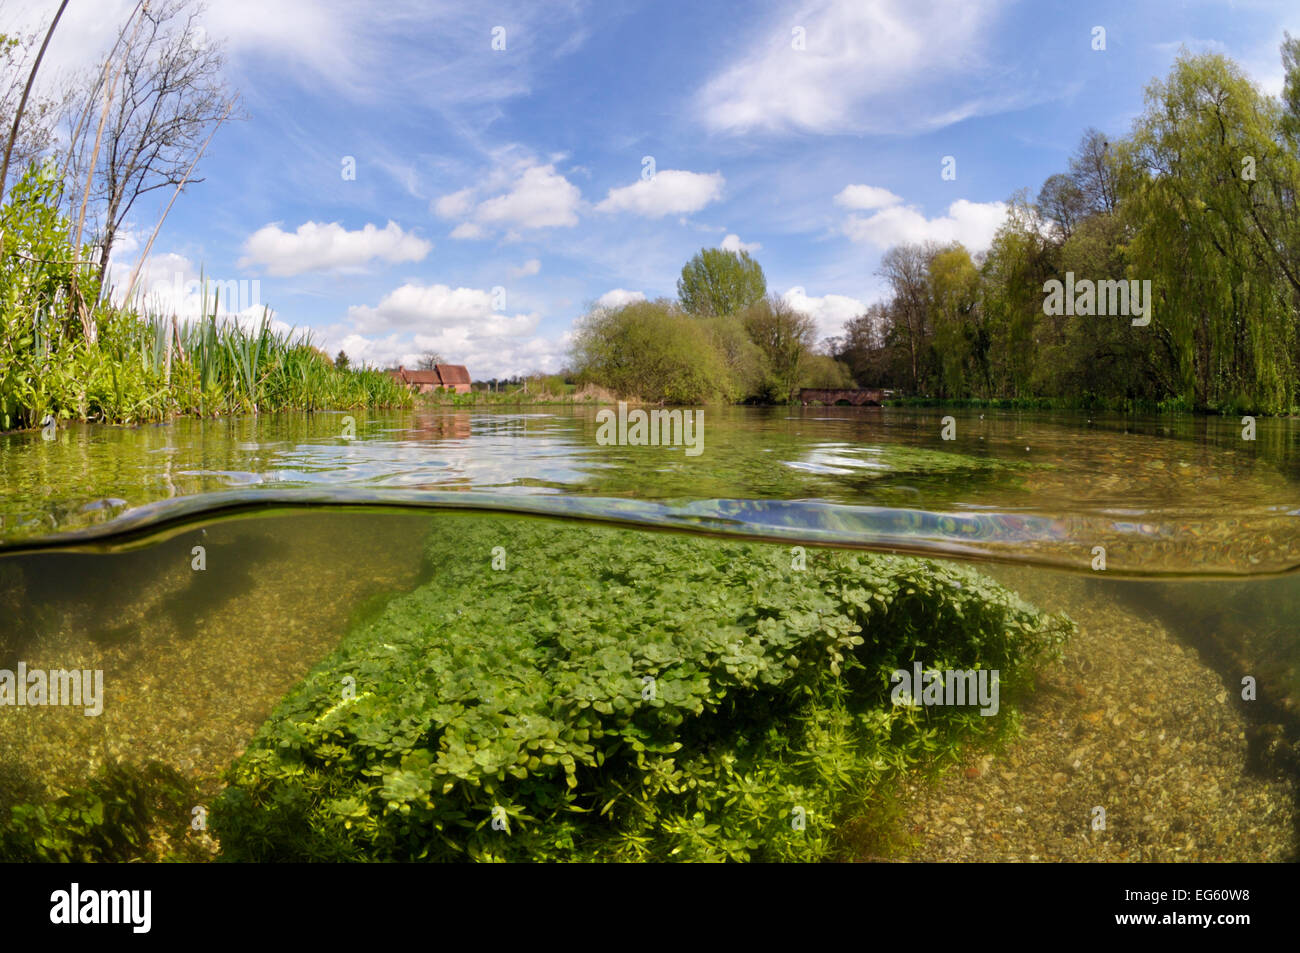 Split level view of the River Itchen, with aquatic plants: Blunt-fruited Water-starwort (Callitriche obtusangula). Itchen Stoke Mill is visible on the left.  Ovington, Hampshire, England, May. Stock Photo